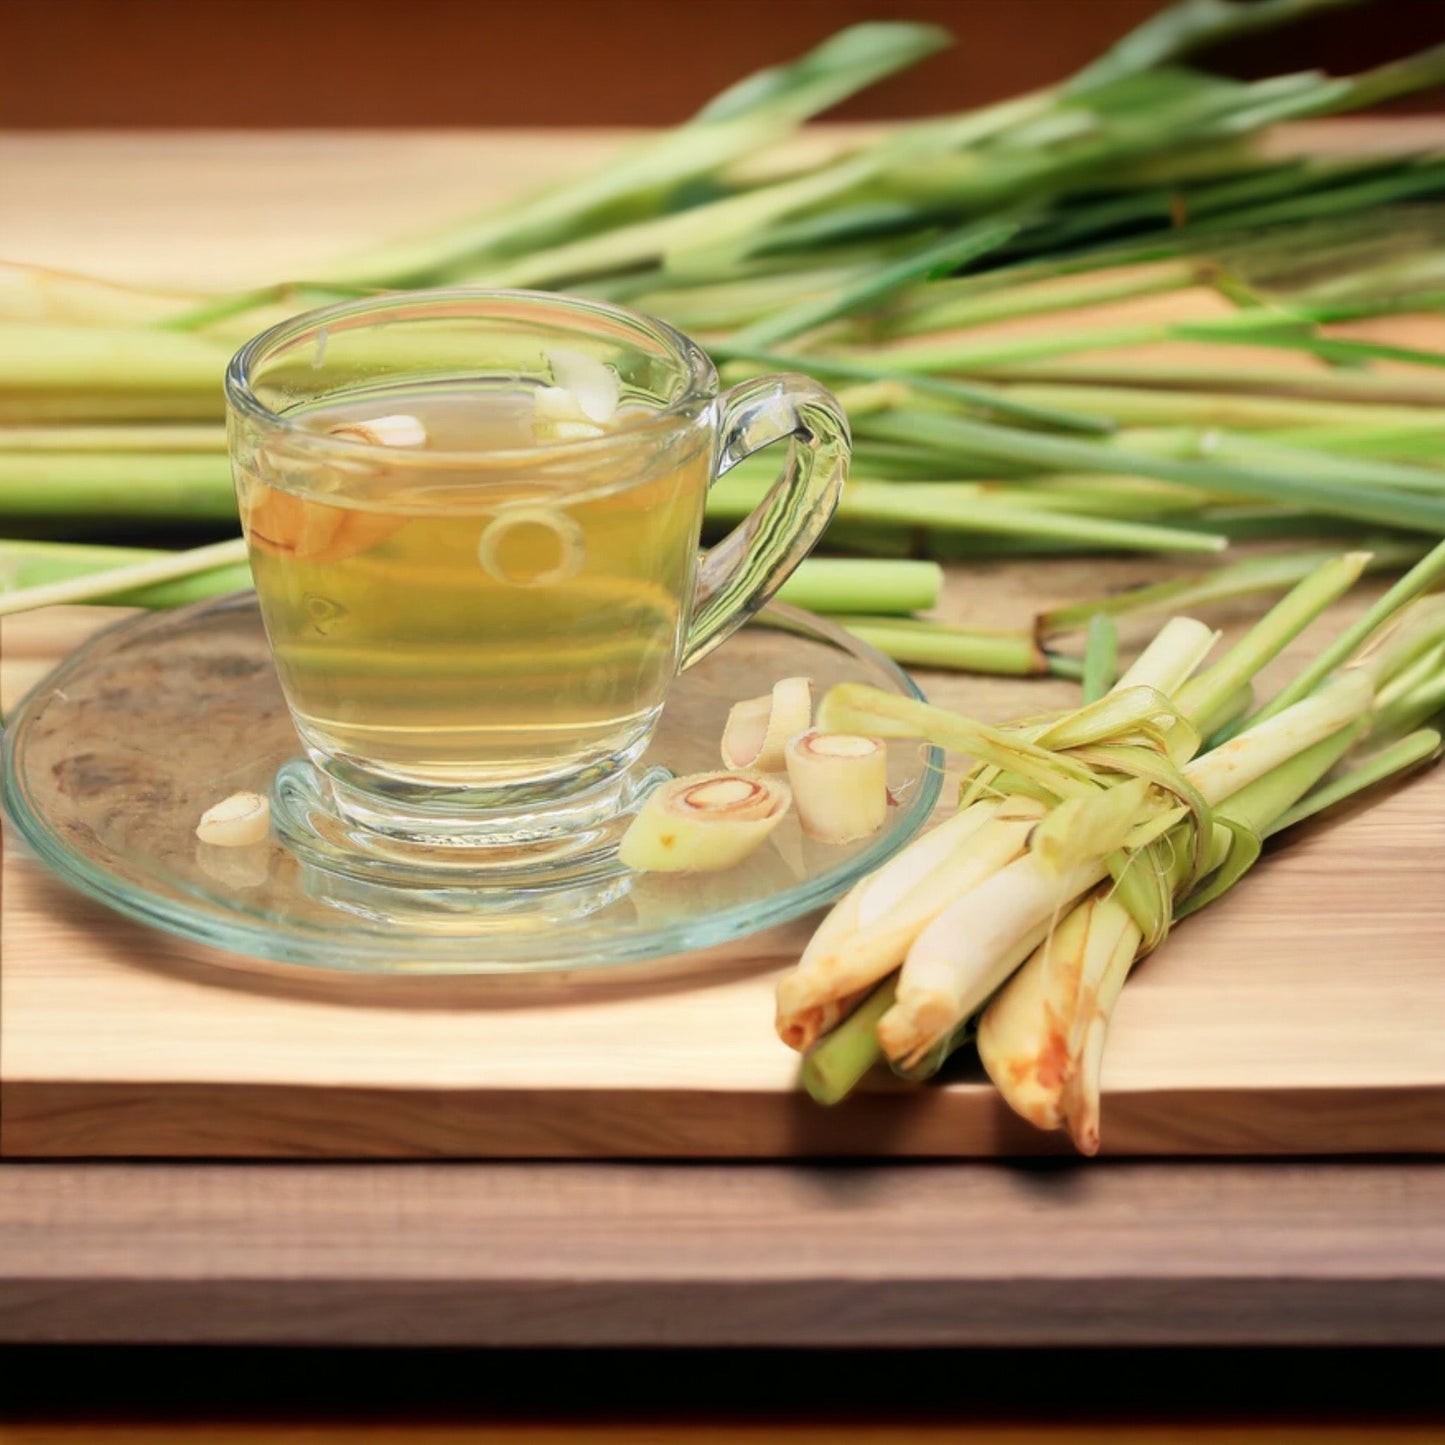 A  freshly brewed yellow lemongrass and ginger tea is in a glass cup